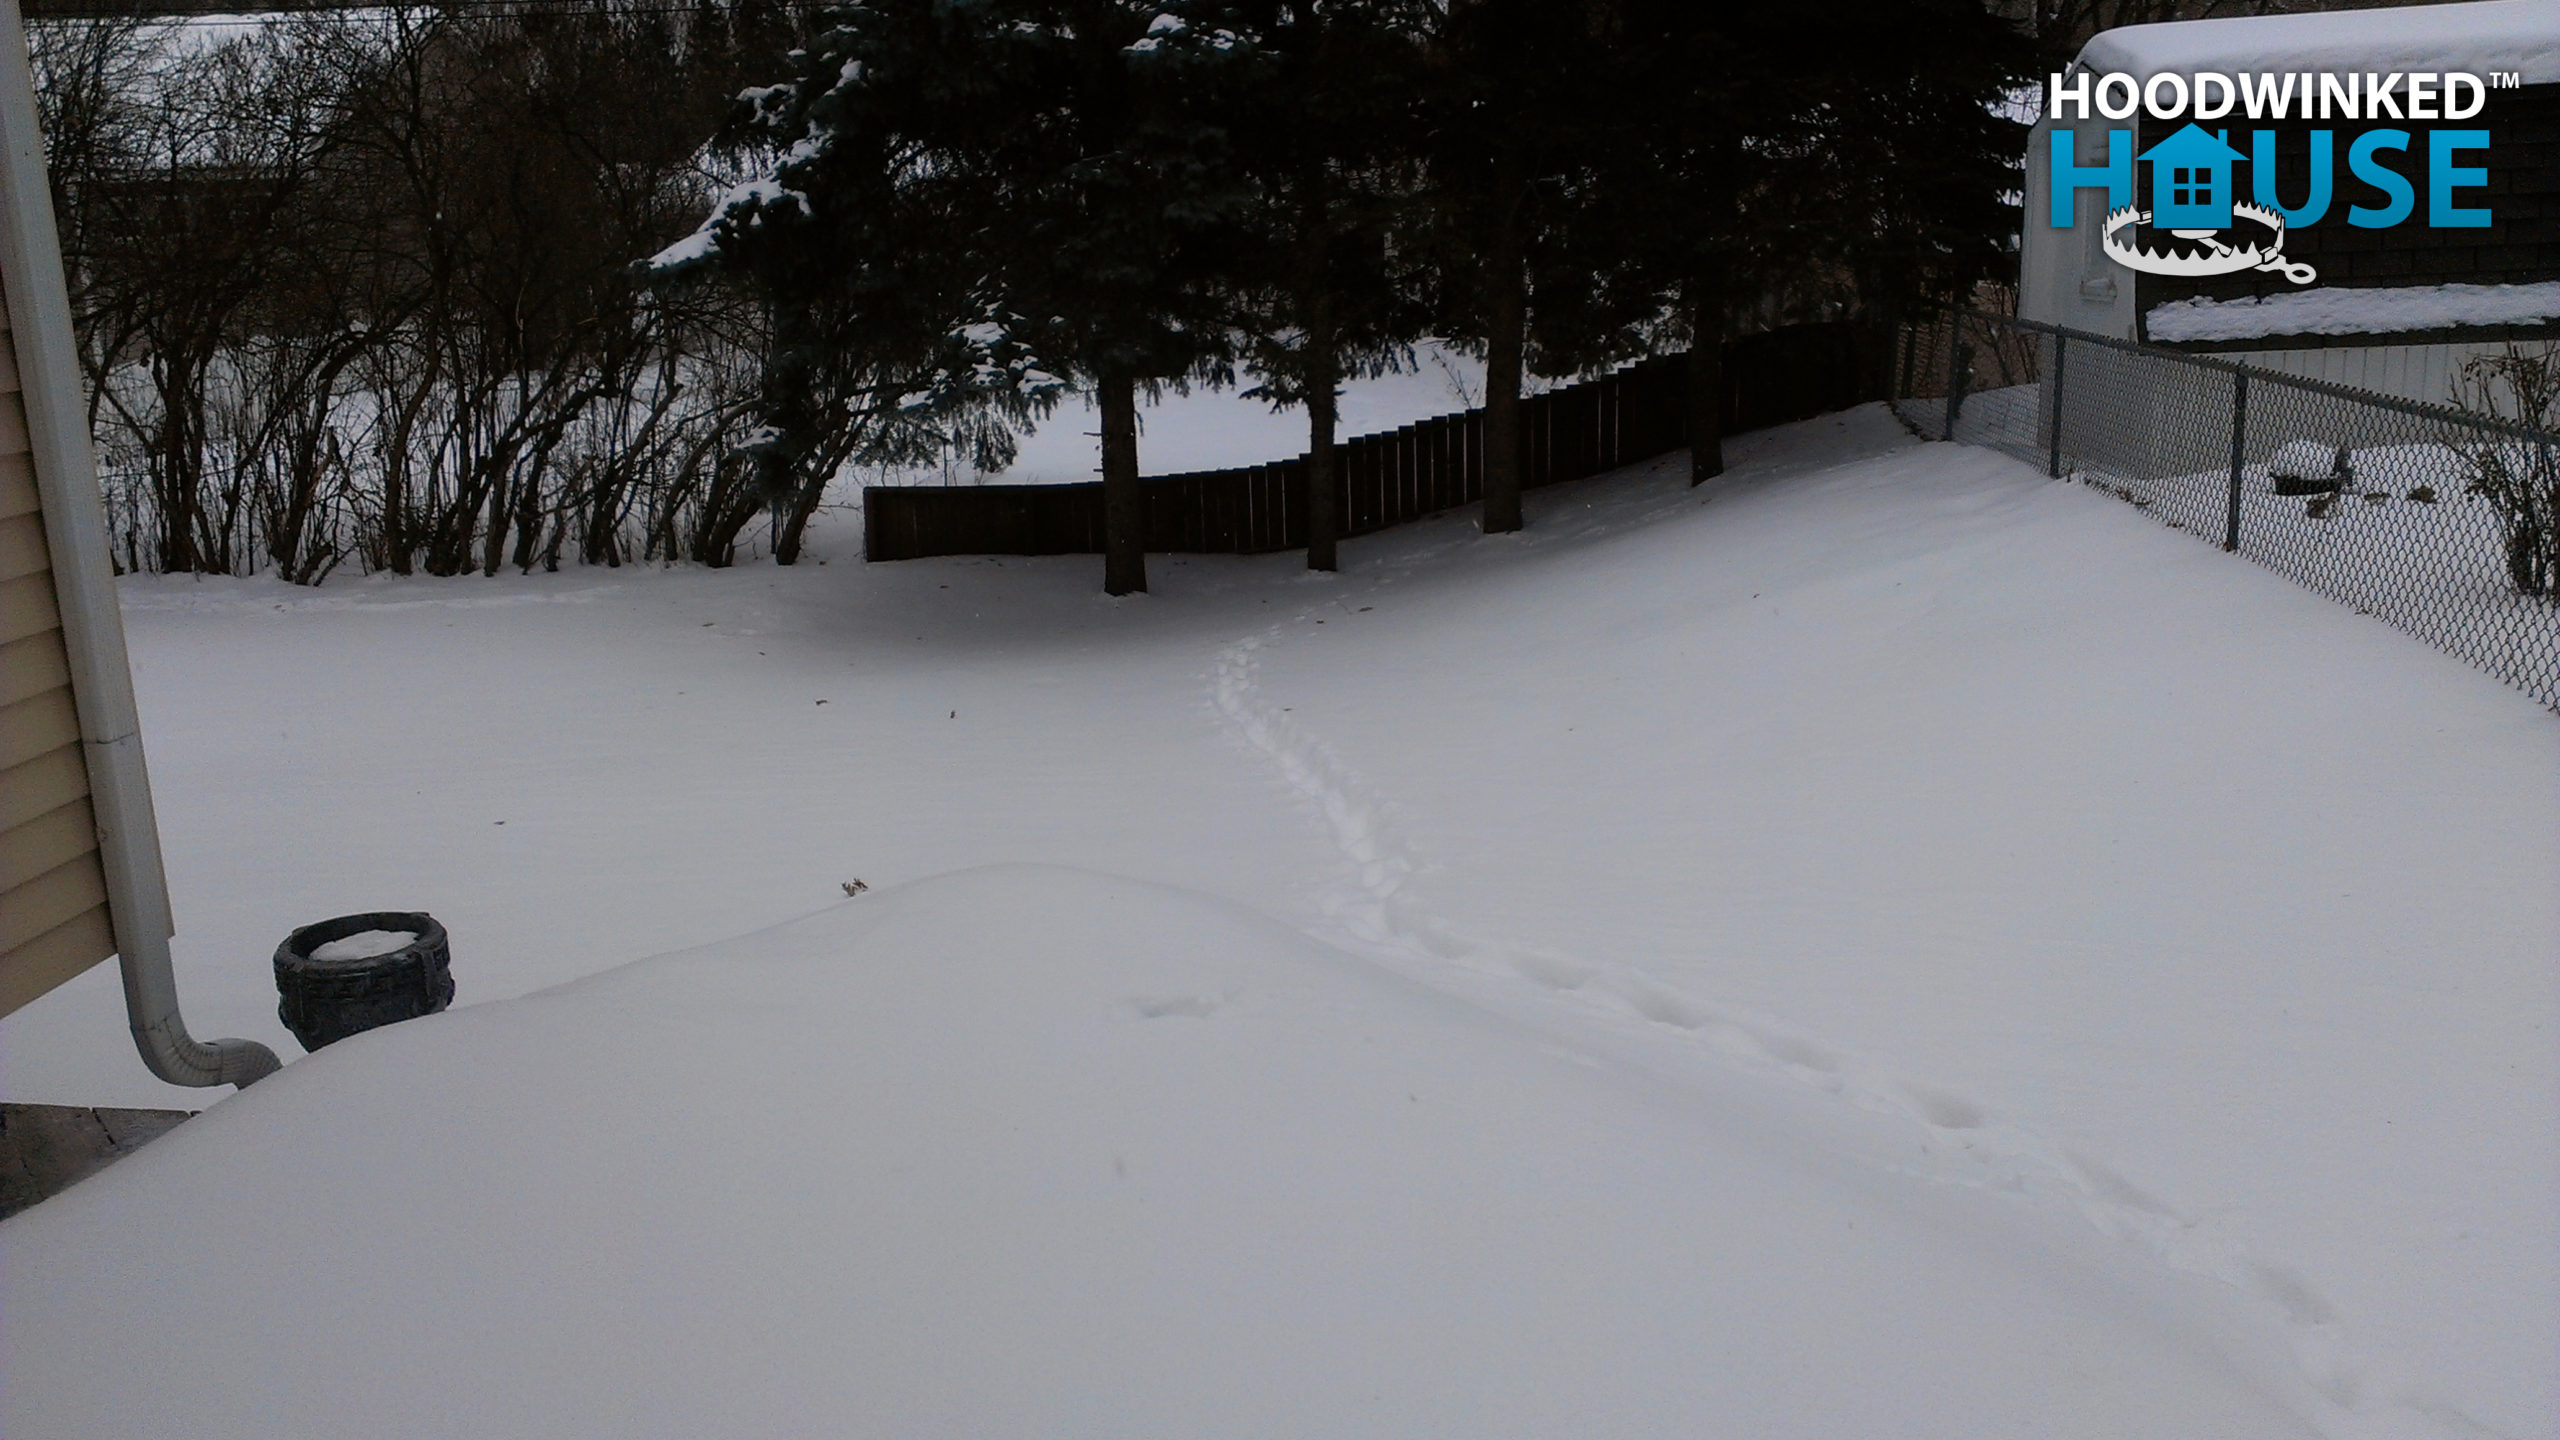 Animal tracks in a snowy back yard lead to a series of large trees.